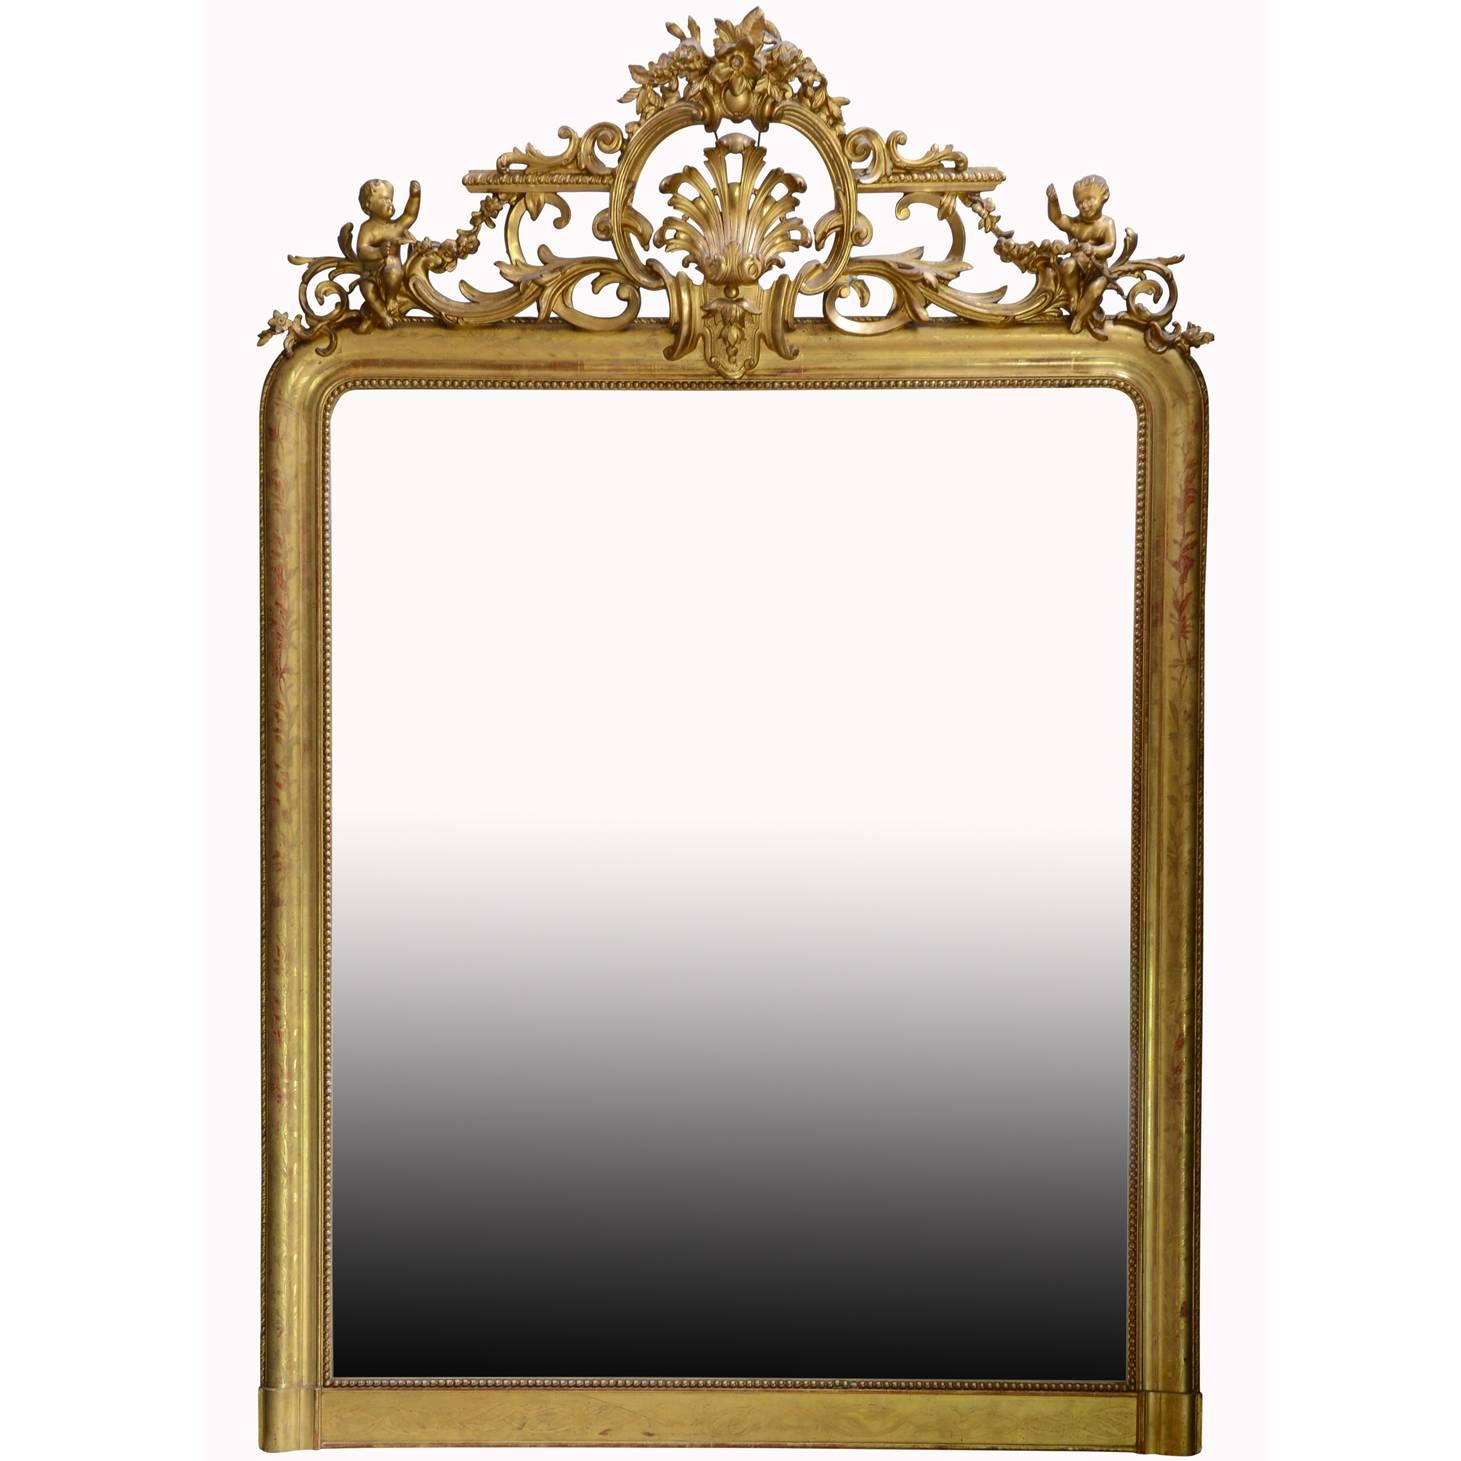 Napoleon III Period Wood and Gilded Stucco Mirror, 19th Century For Sale